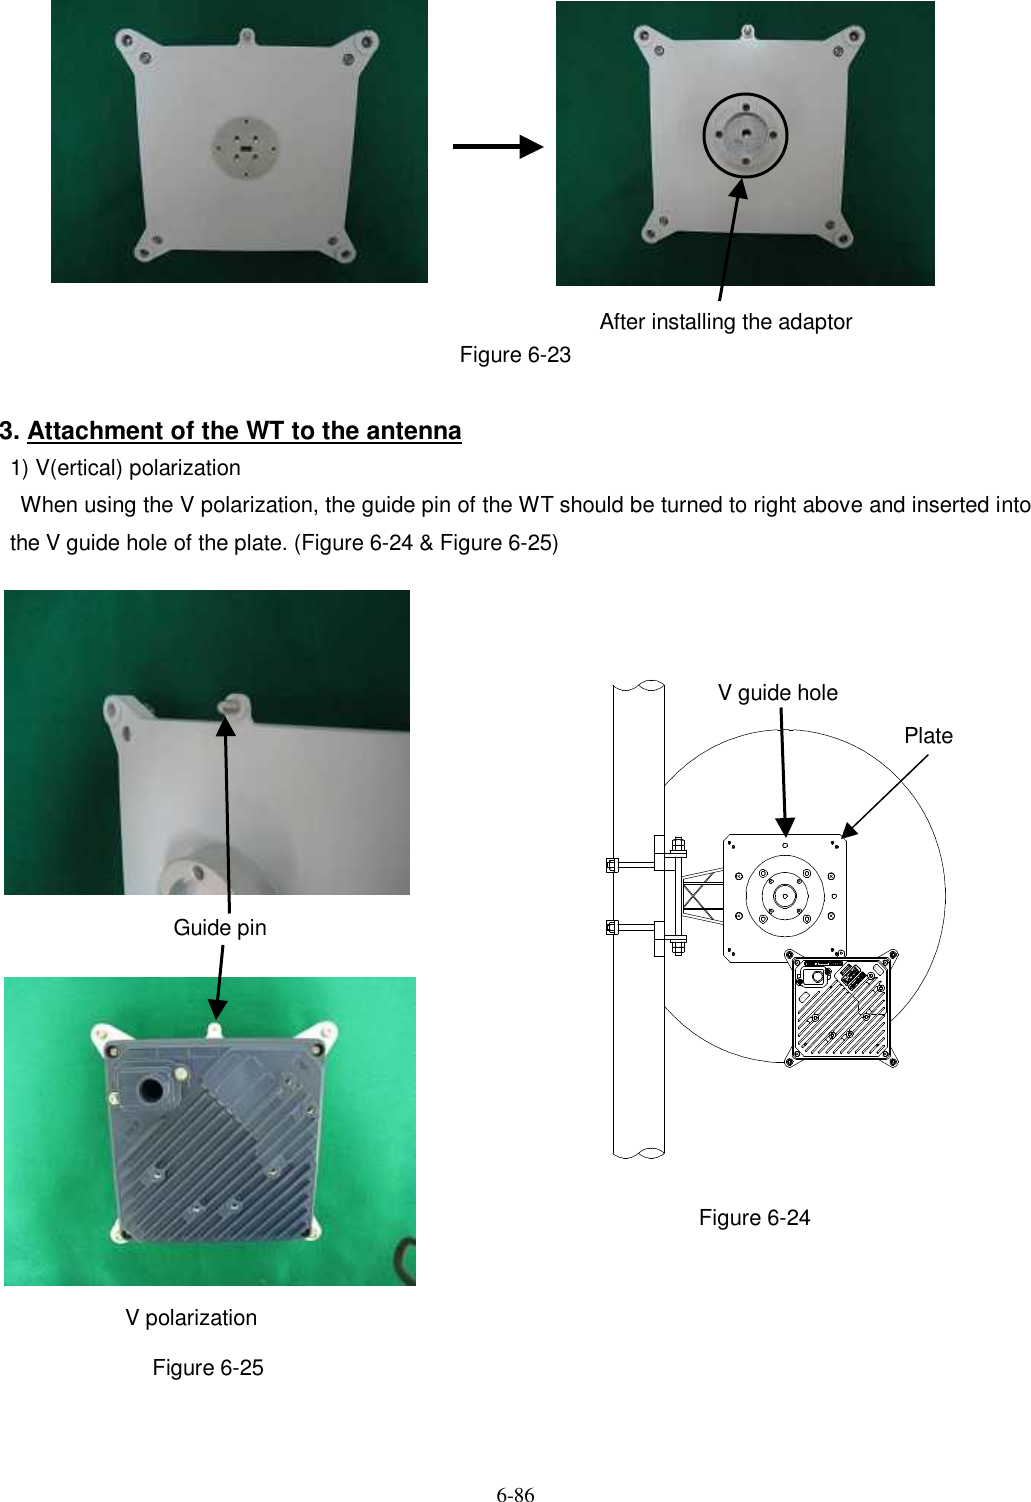   6-86            Figure 6-23  3. Attachment of the WT to the antenna 1) V(ertical) polarization     When using the V polarization, the guide pin of the WT should be turned to right above and inserted into the V guide hole of the plate. (Figure 6-24 &amp; Figure 6-25)                                  Figure 6-24        Figure 6-25   V polarization Guide pin After installing the adaptor V guide hole Plate Ｔ ＯＰＶＴＯＰ ＨＥＴＨＥＲ